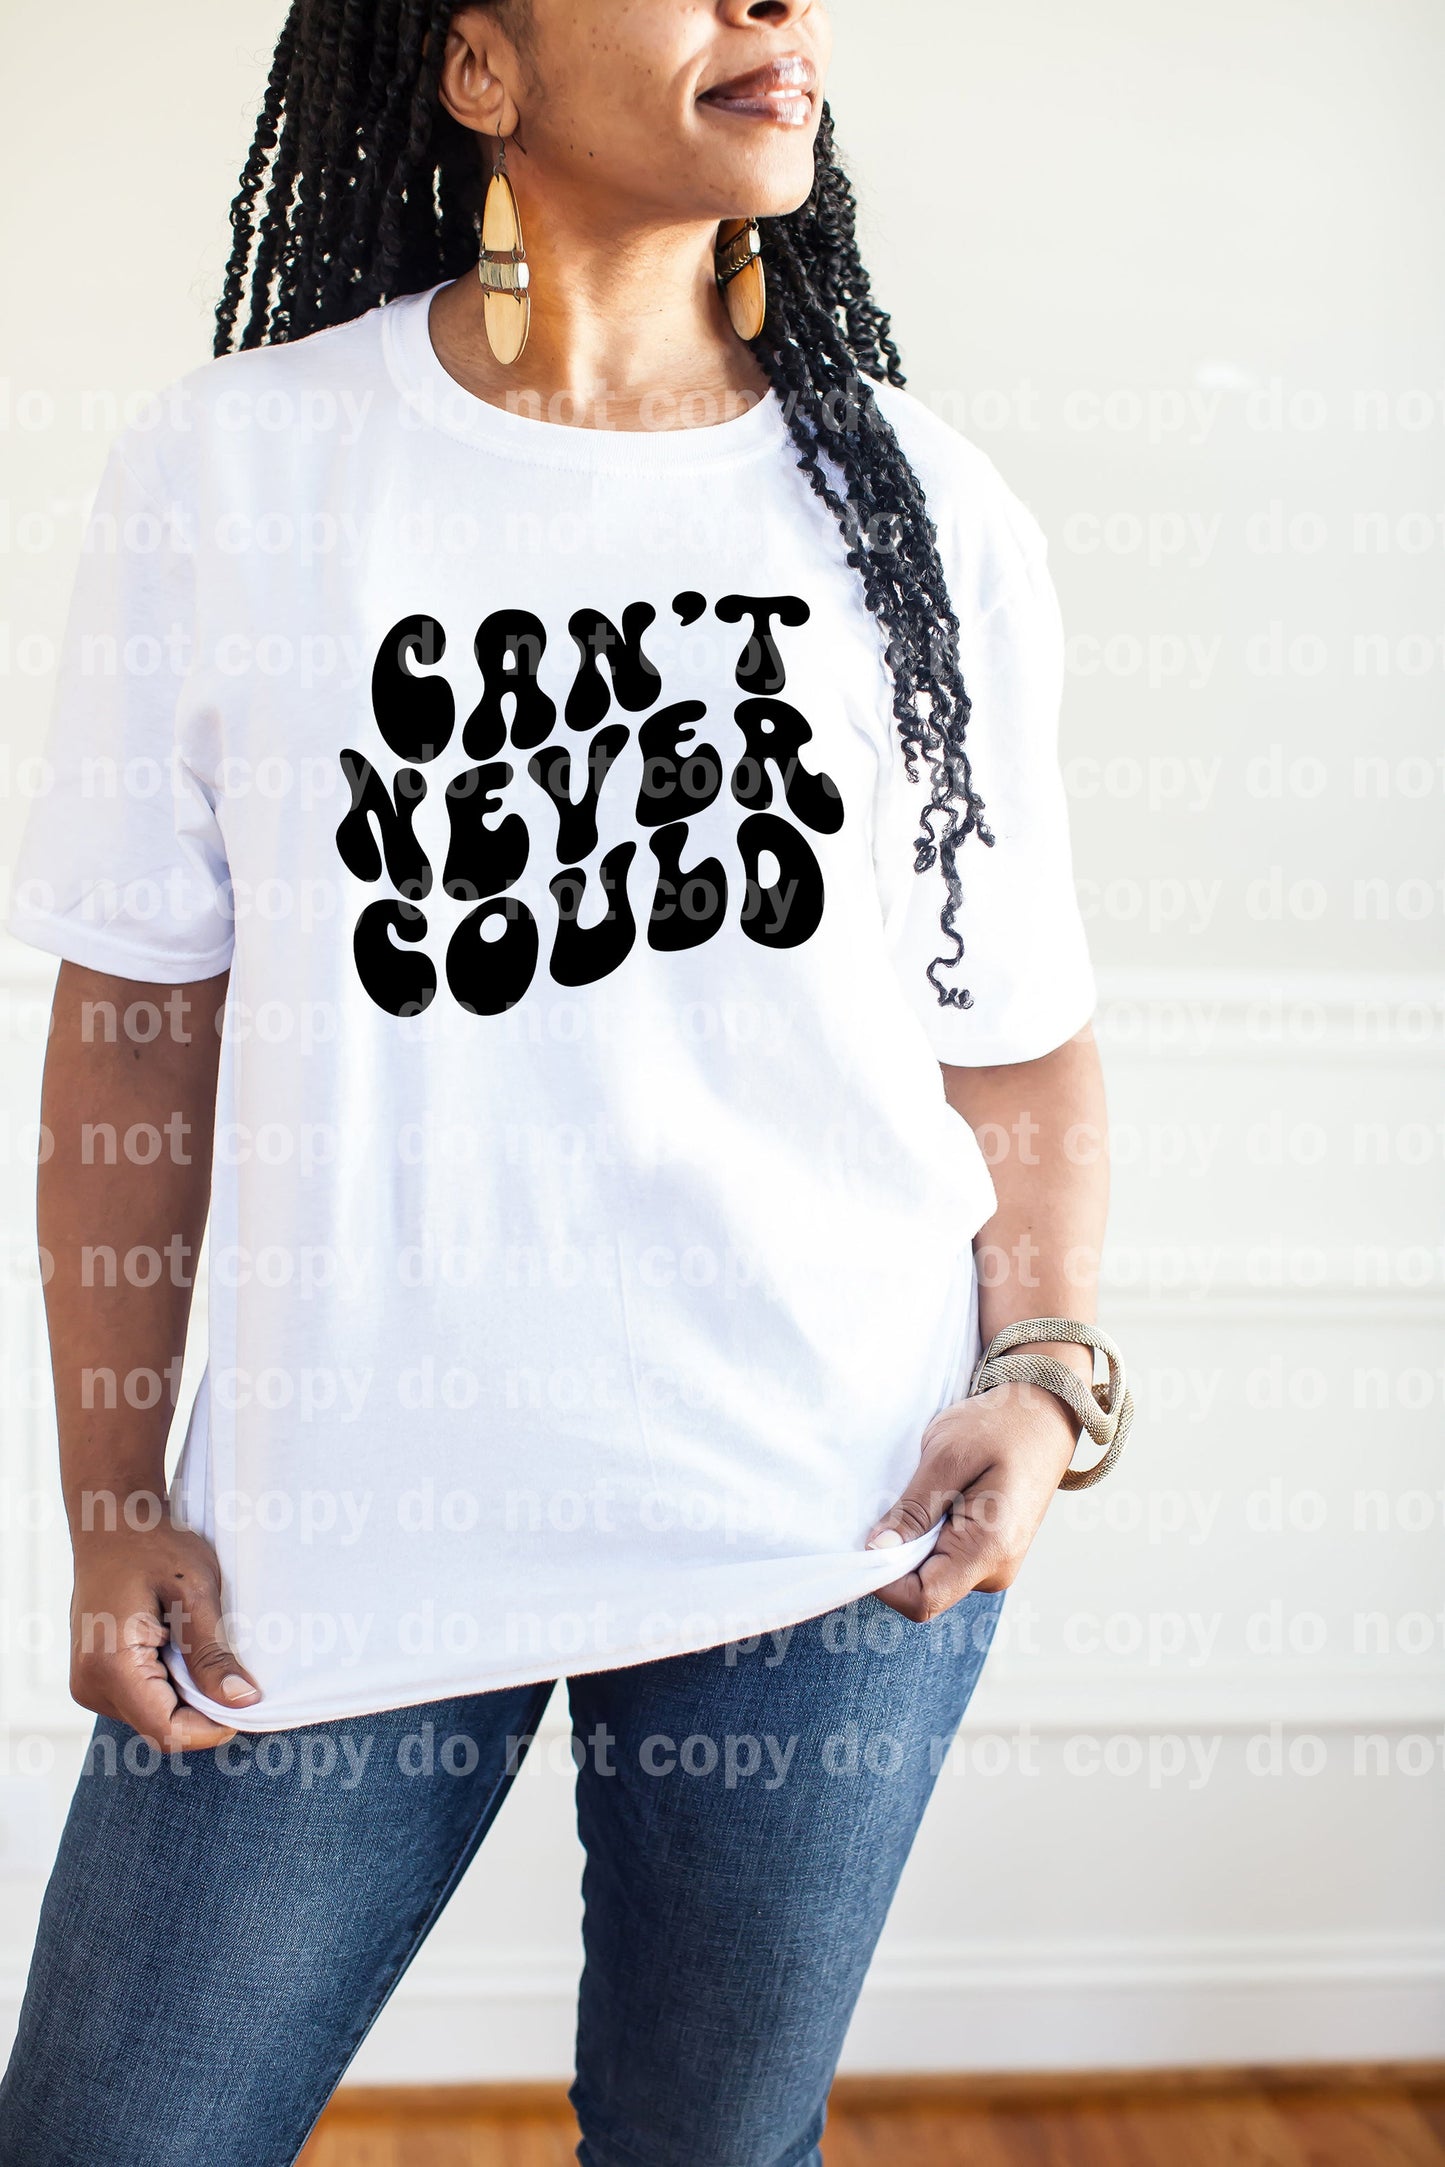 Can't Never Could Black/White Dream Print or Sublimation Print